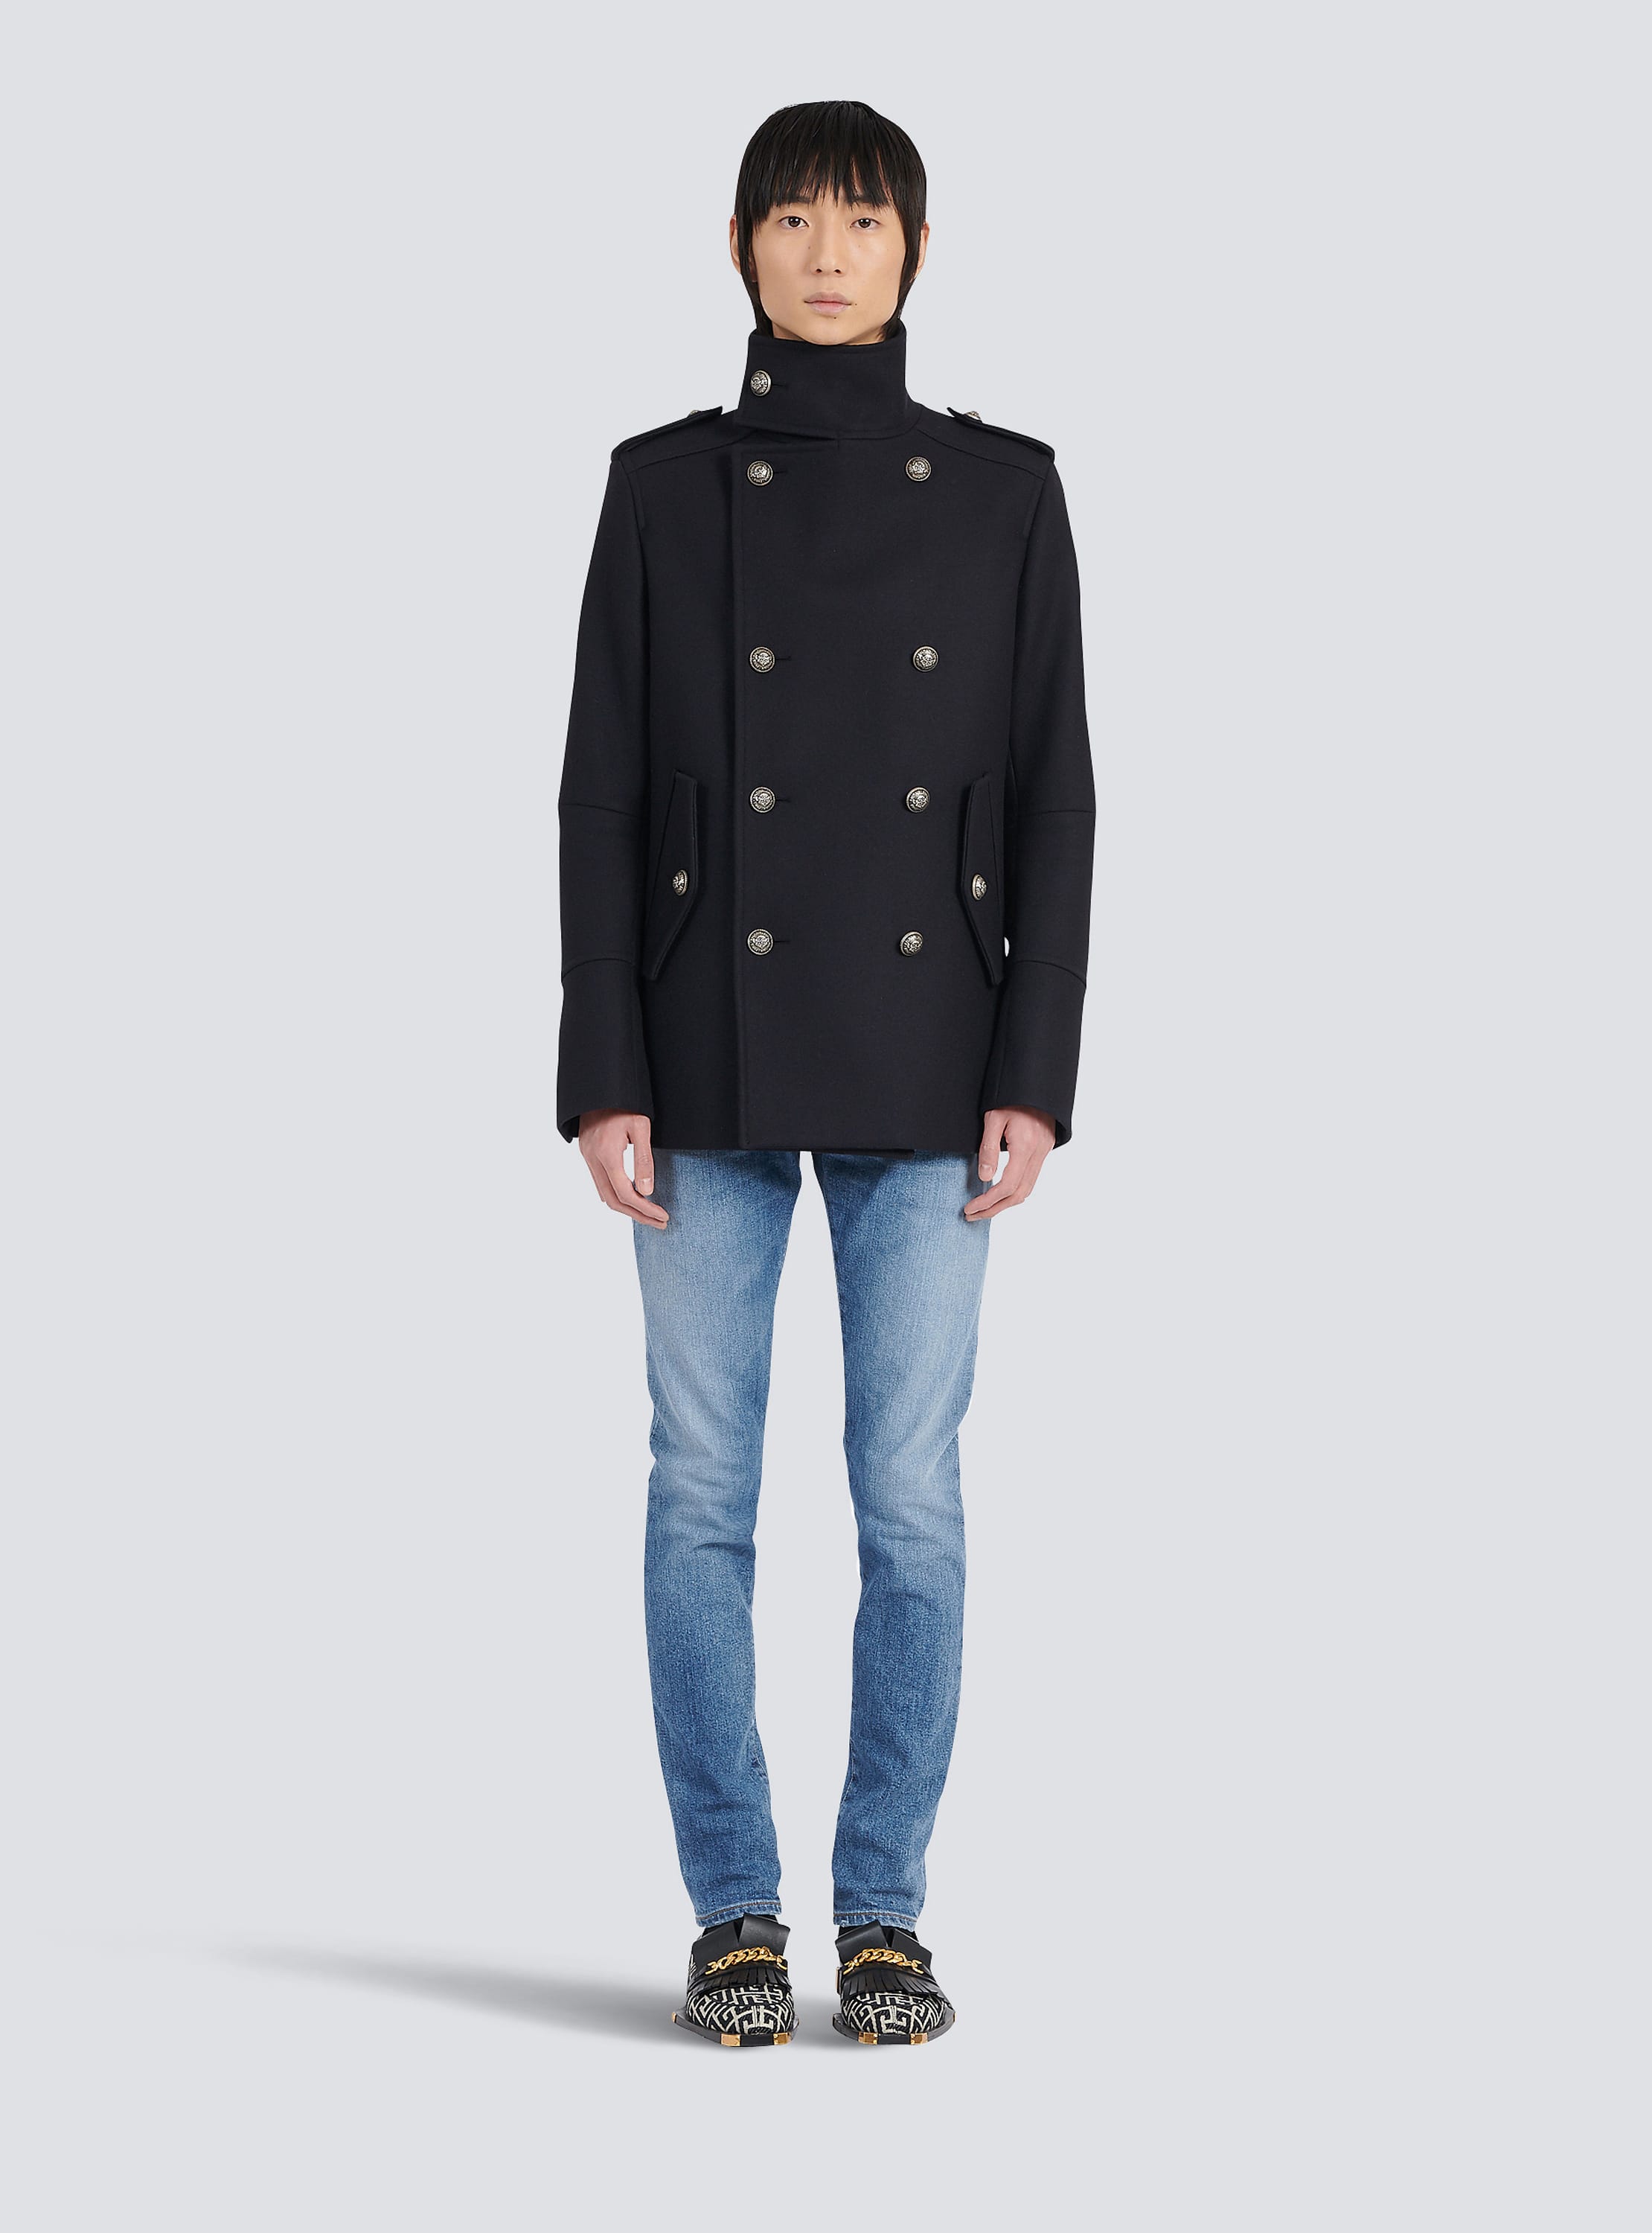 retort Samler blade zone Wool military pea coat with double-breasted silver-tone buttoned fastening  black - Men | BALMAIN